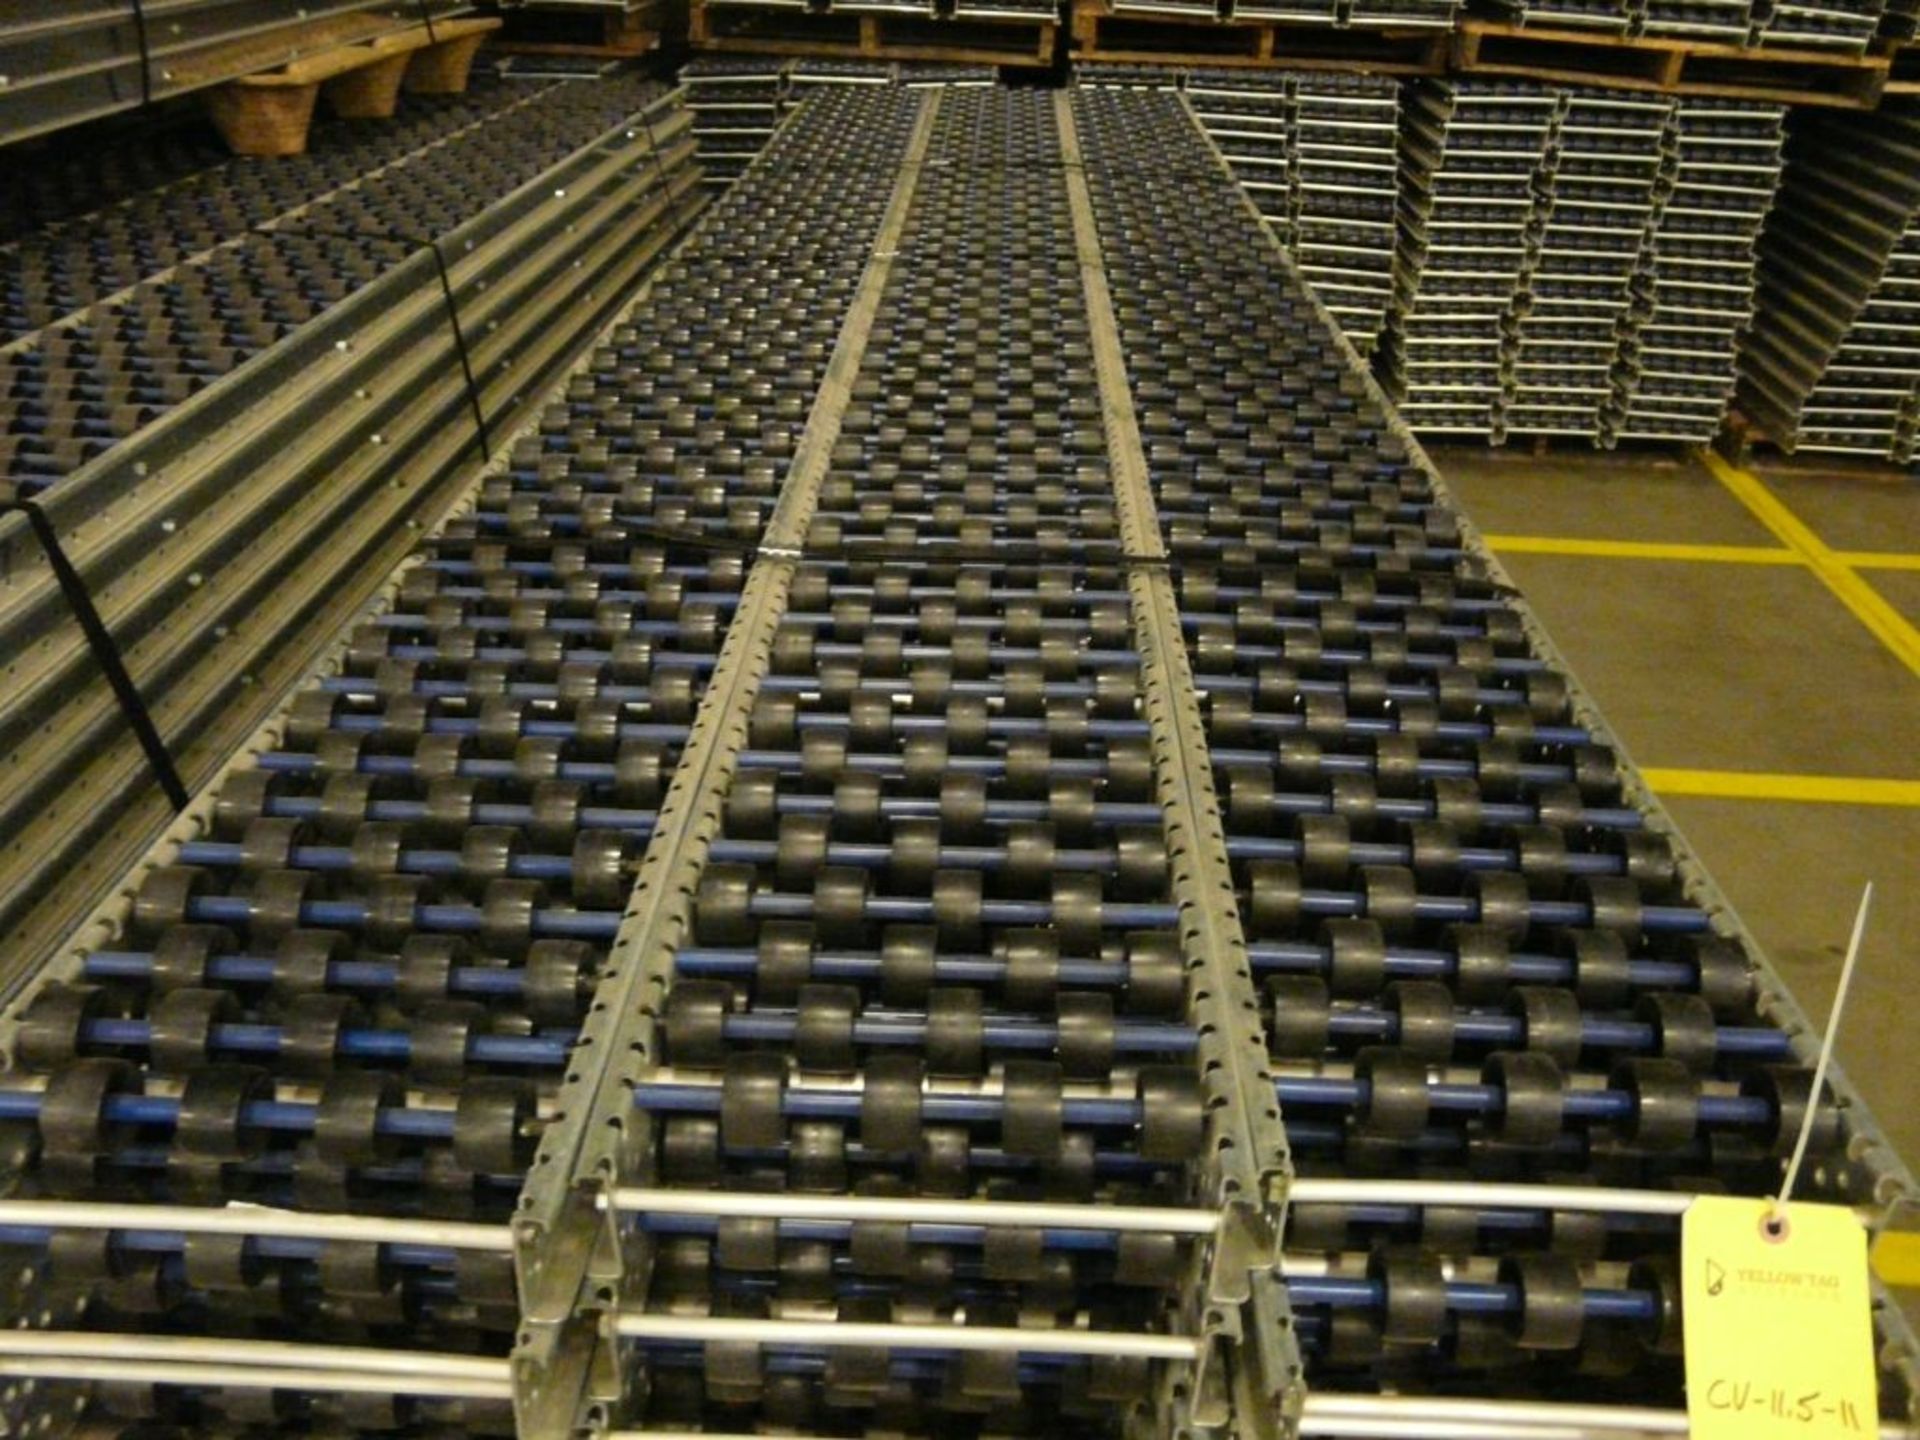 Lot of (90) SpanTrack Wheelbed Carton Flow Conveyors - 11.5'L x 11"W; Tag: 223574 - $30 Lot - Image 3 of 4